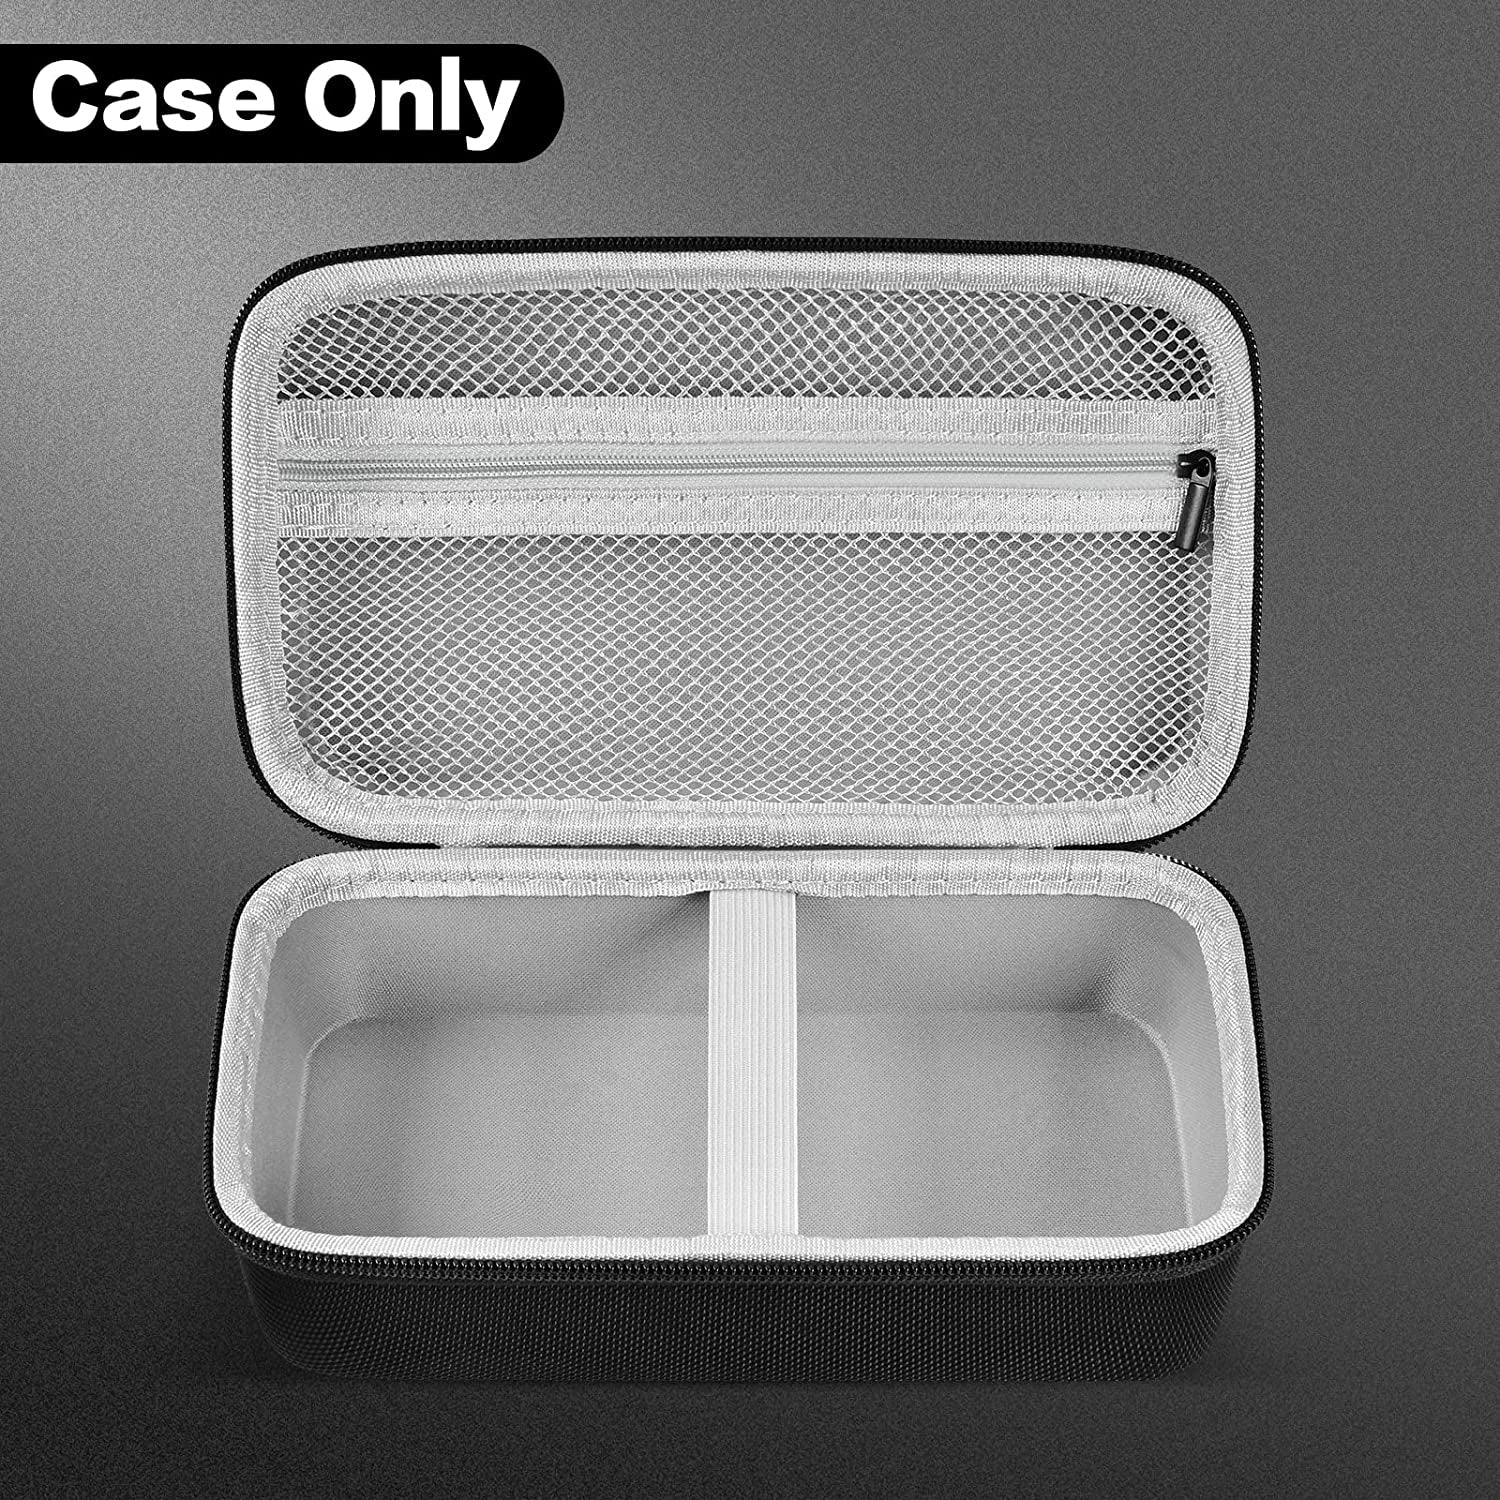 Case Compatible with DYMO Label Maker Labelmanager 160/280/ COLORPOP Portable Label Maker, Hard Travel Carrying Storage Bag Holder with Accessories Mesh Pocket (Box Only)